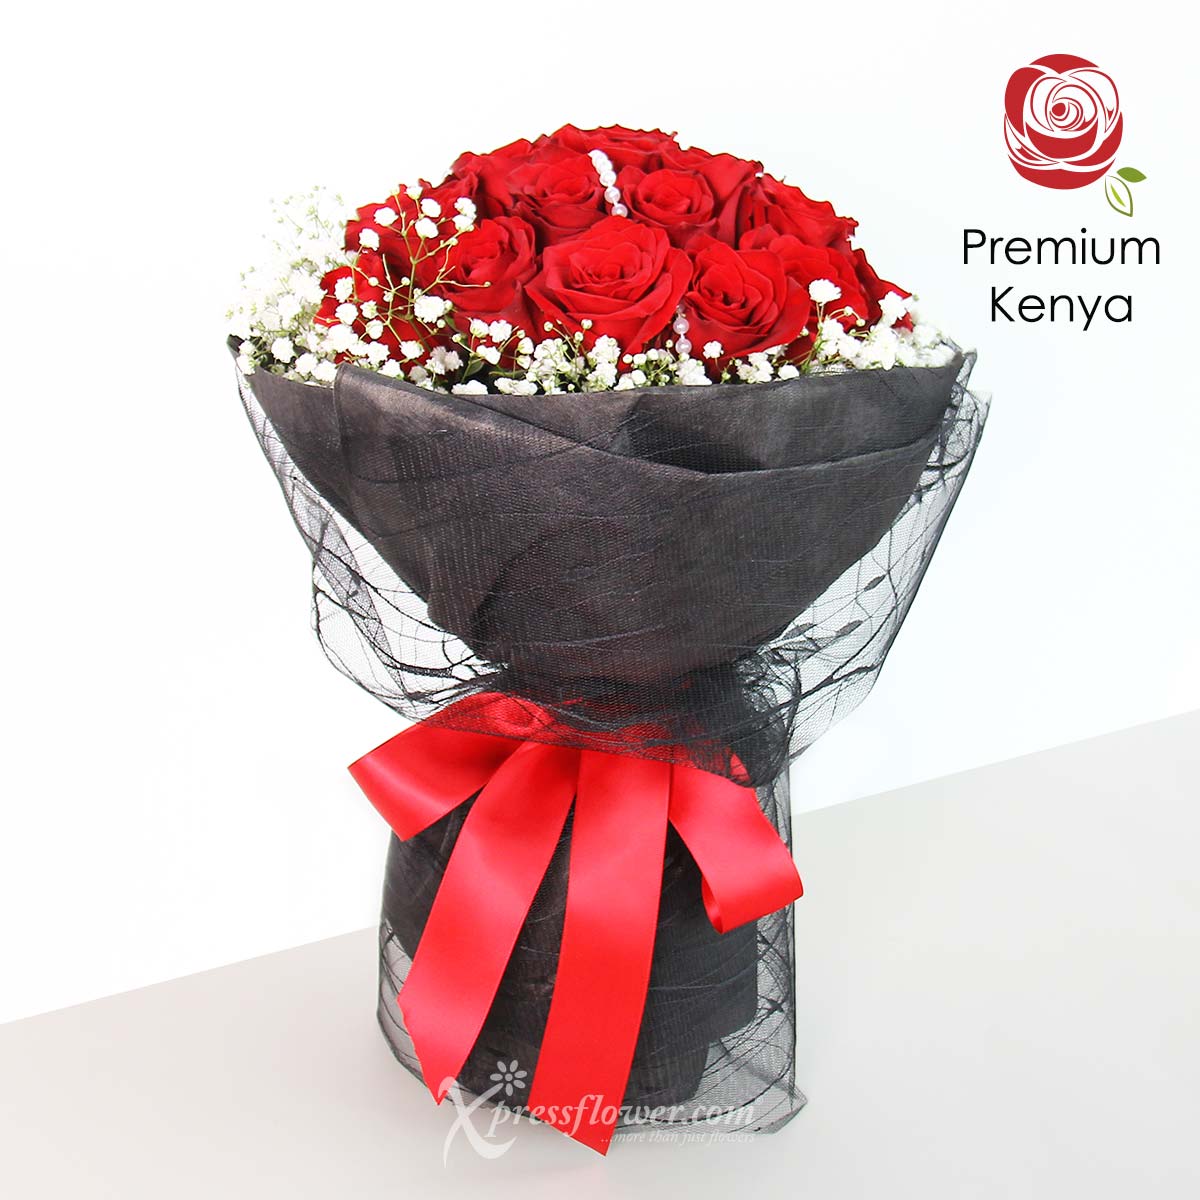 Grand Affection (24 Red Roses)